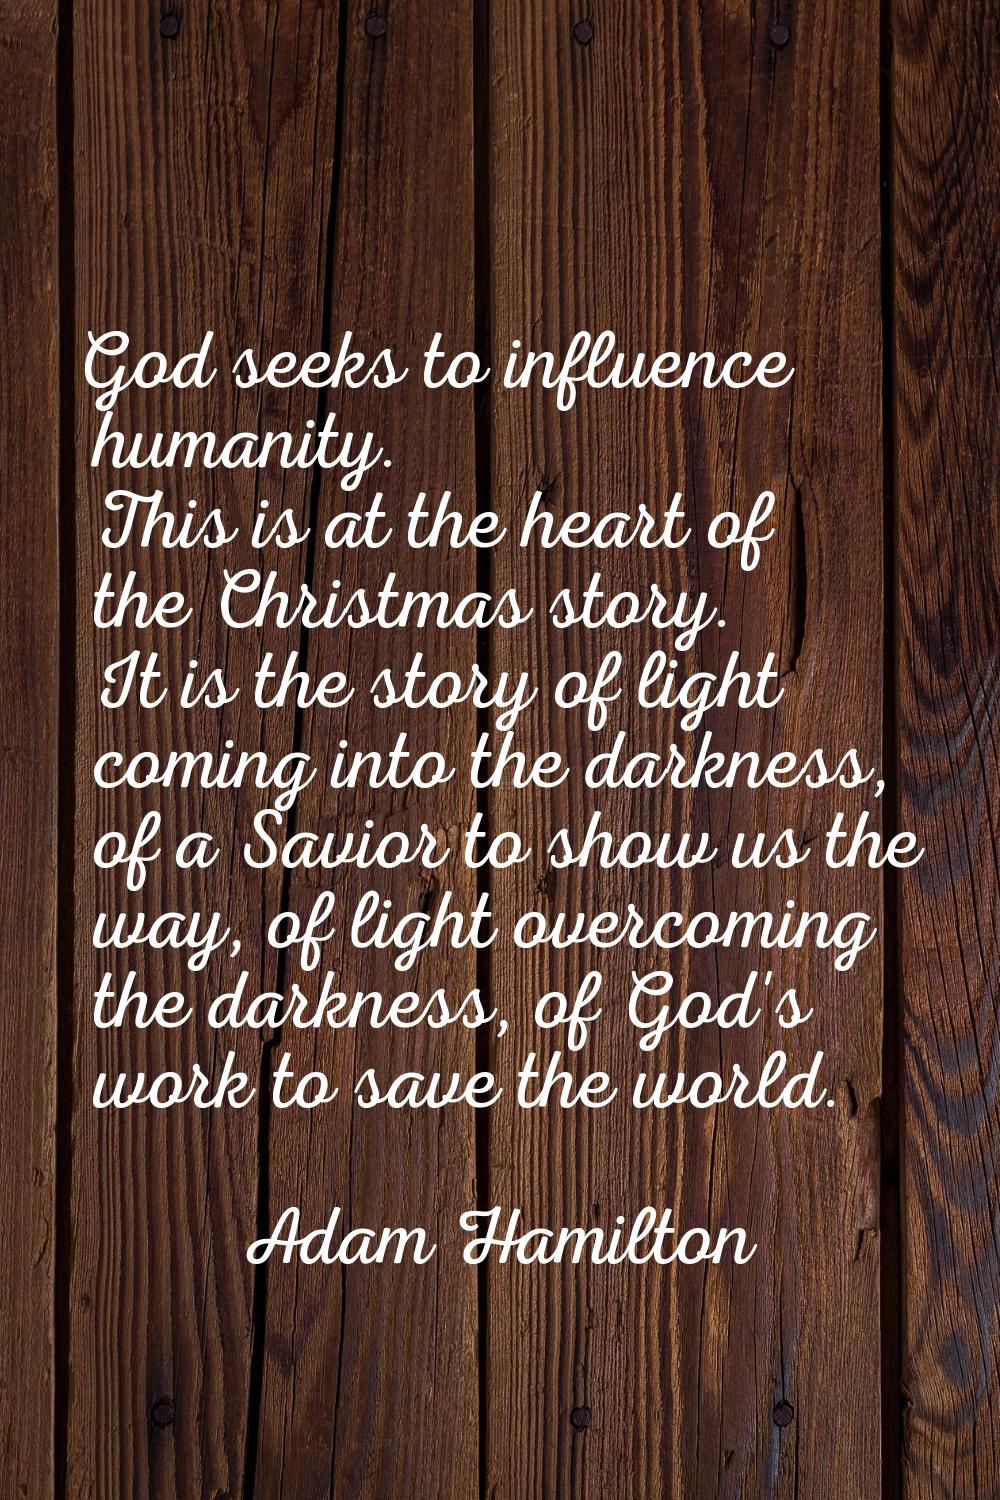 God seeks to influence humanity. This is at the heart of the Christmas story. It is the story of li